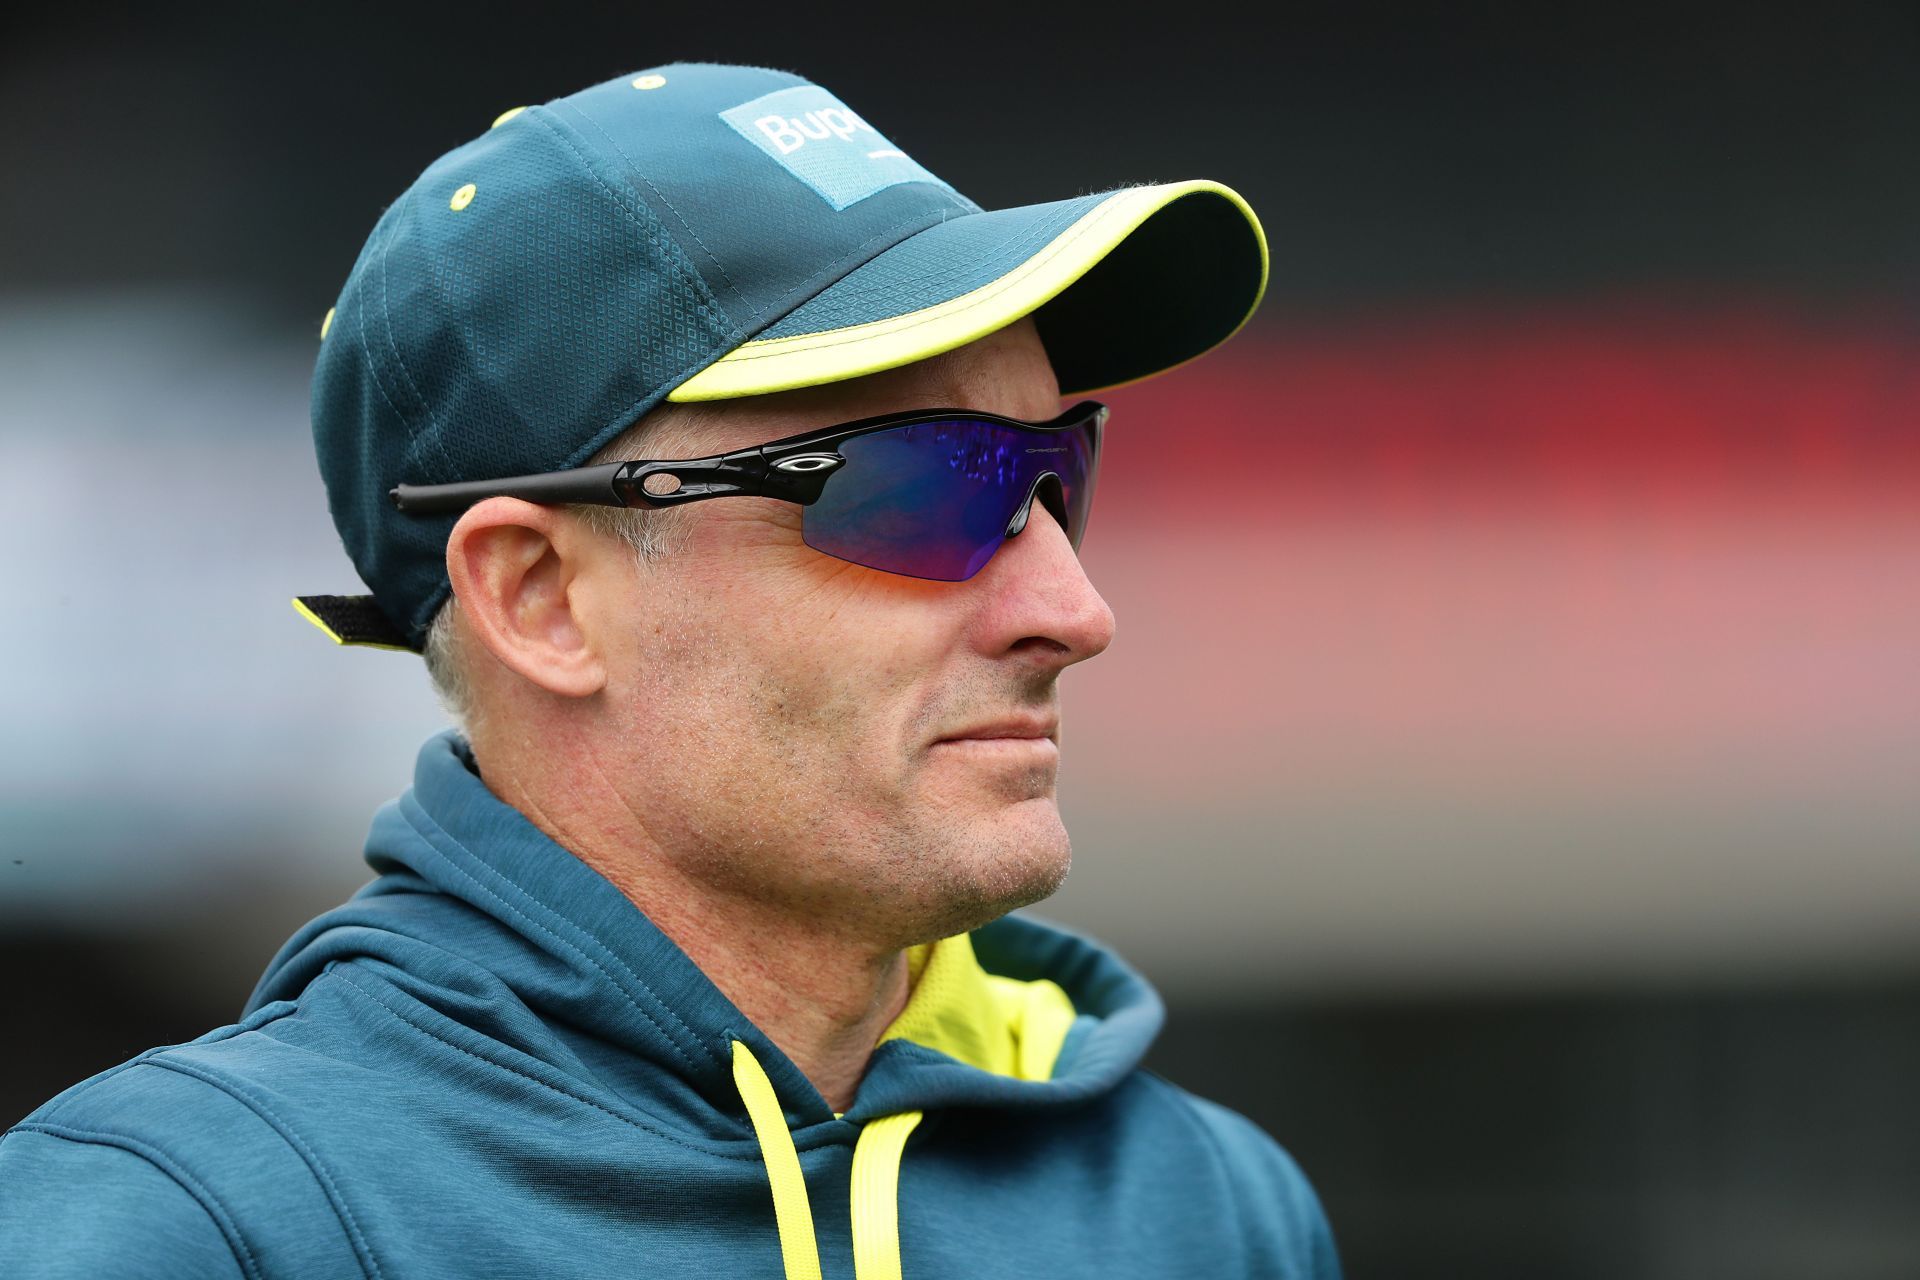 Michael Hussey is the batting coach of Chennai Super Kings